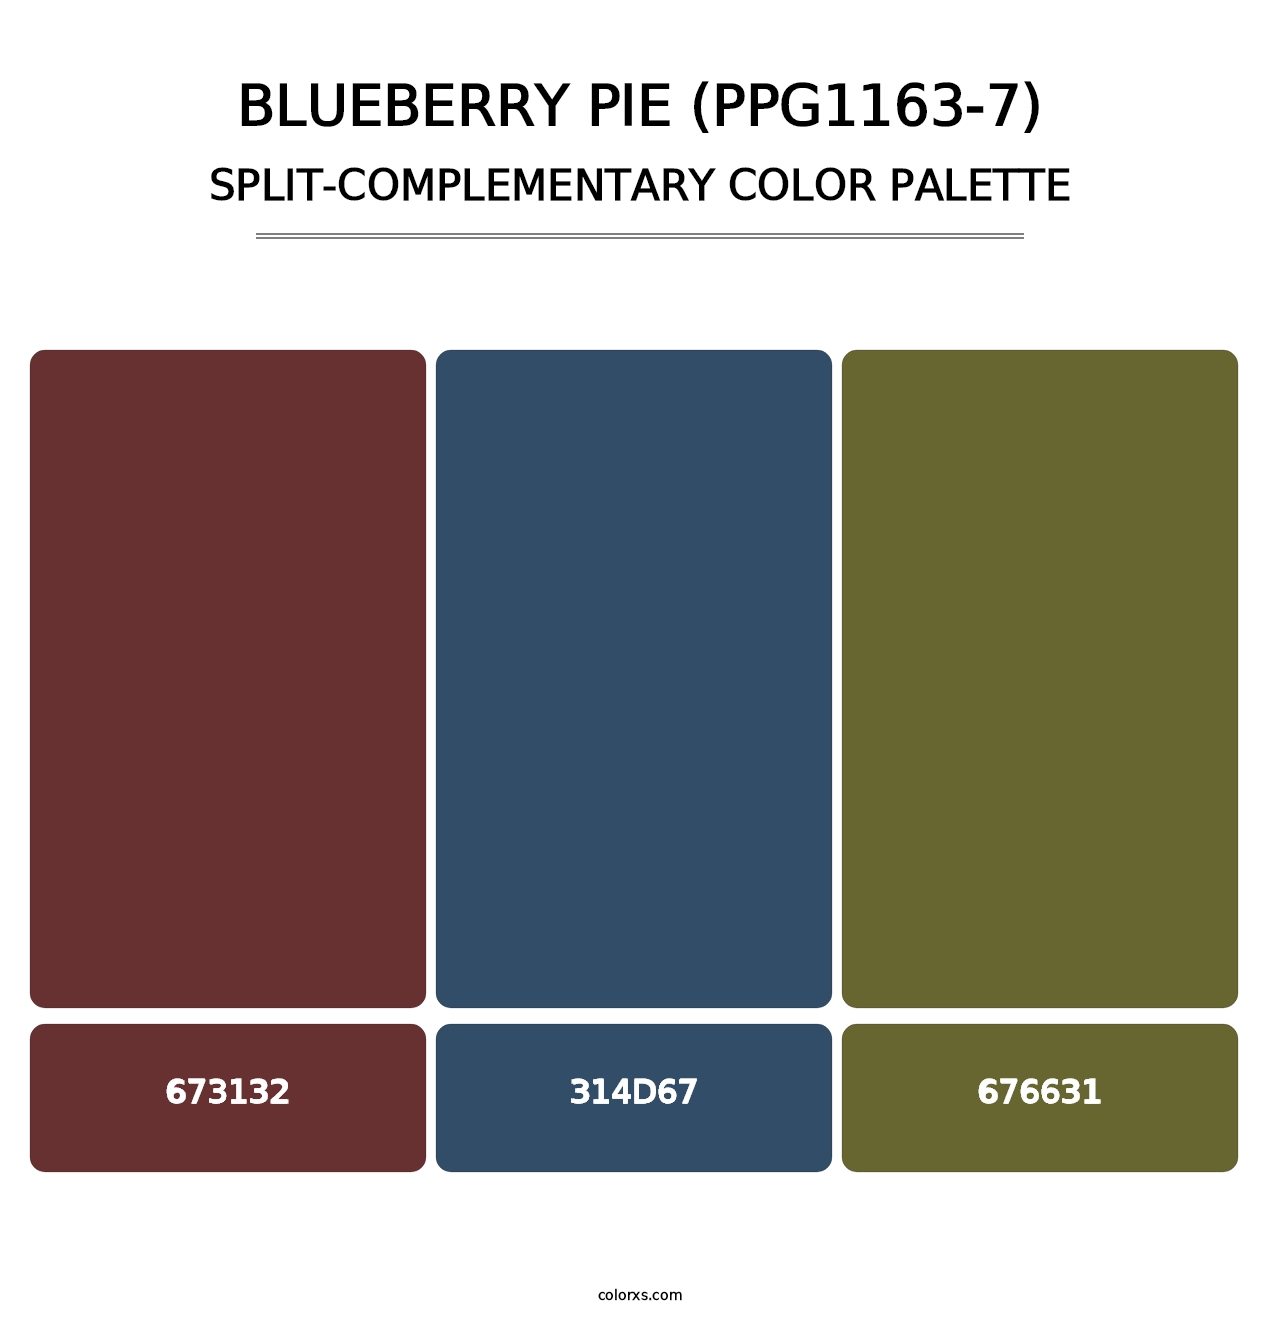 Blueberry Pie (PPG1163-7) - Split-Complementary Color Palette